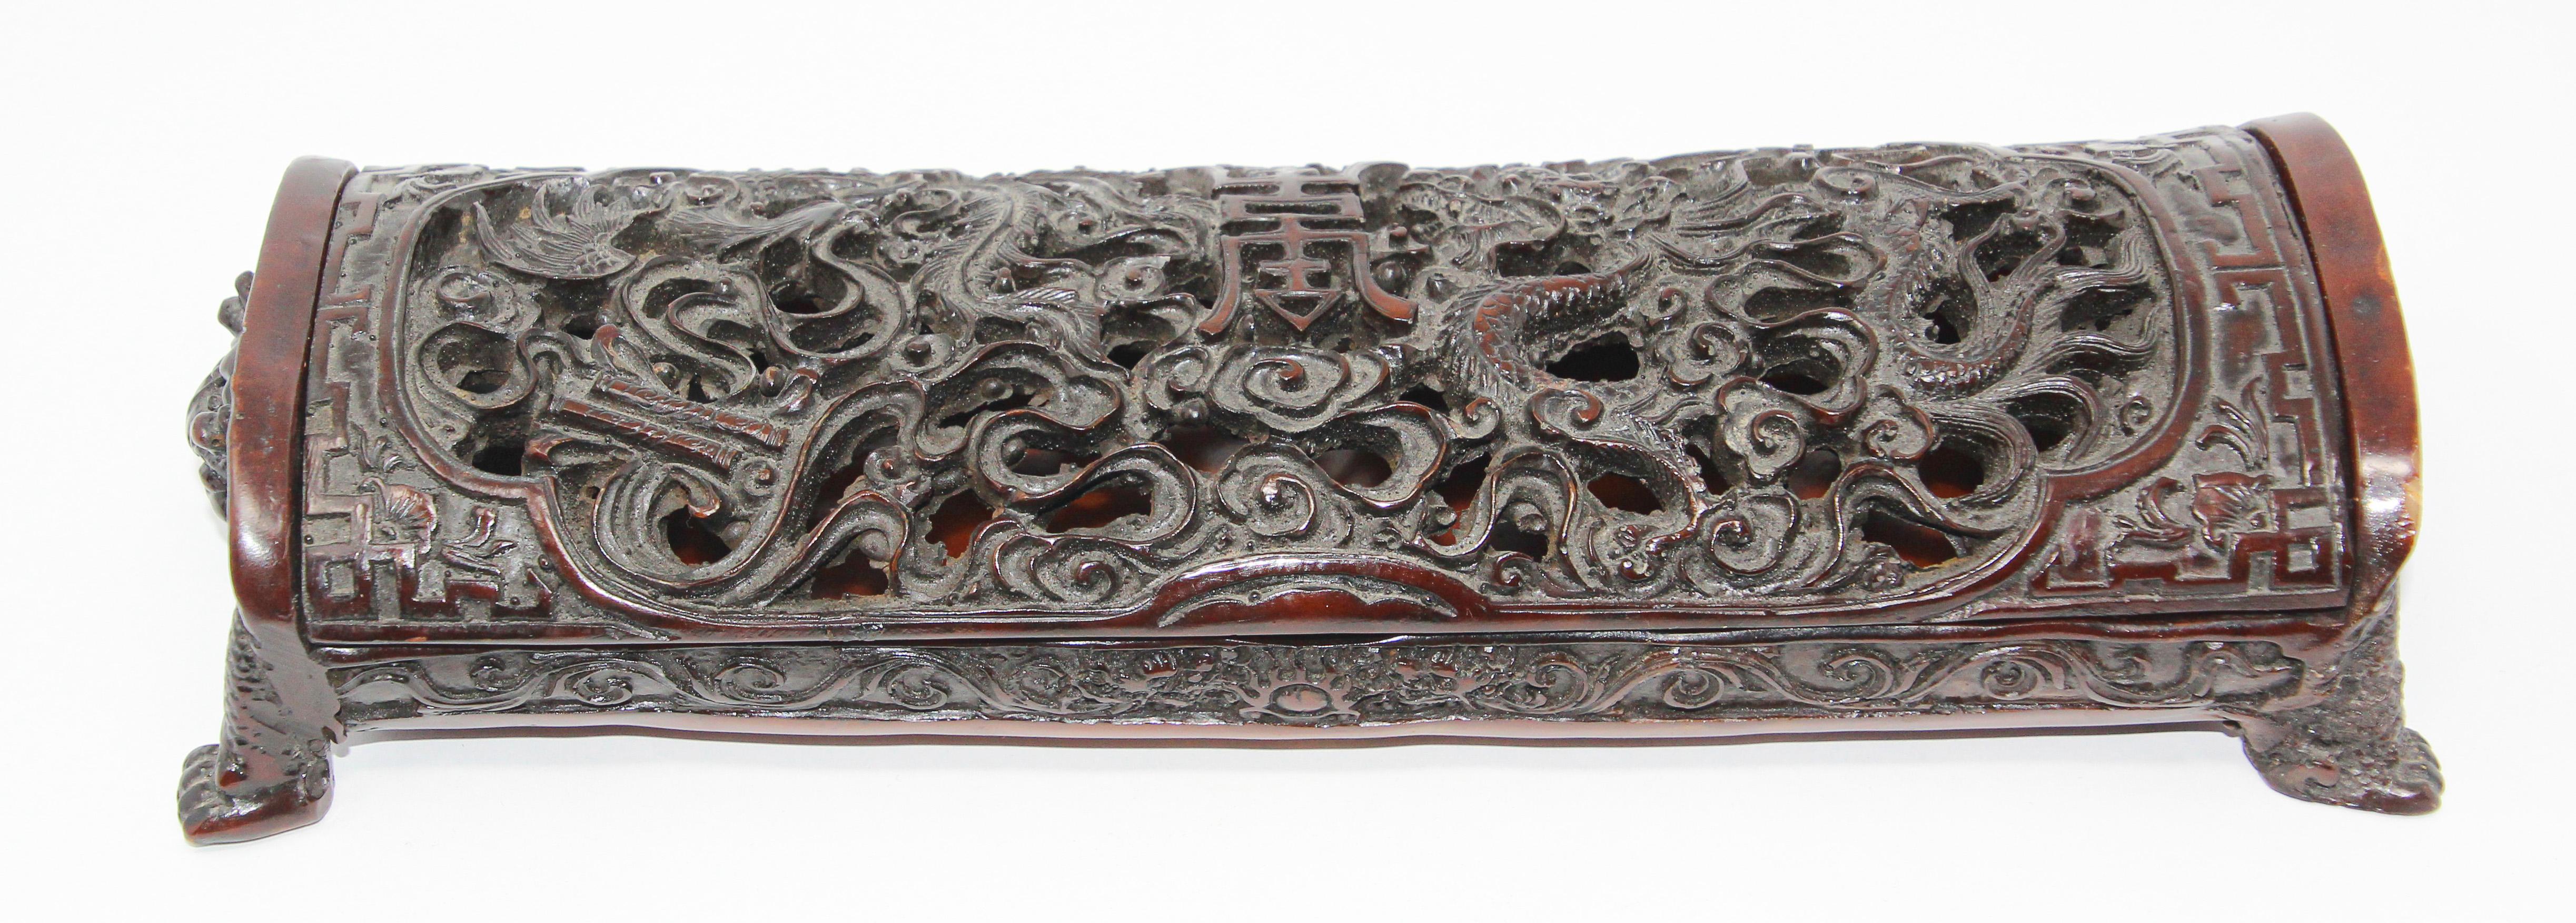 Chinese box with dragon motifs.
The rectangular lidded dragon box is embellished with a fine and impressive design featuring high relief dragon heads on each side.
A very well done Chinese figural art object in dark cast resin composite.
Great to